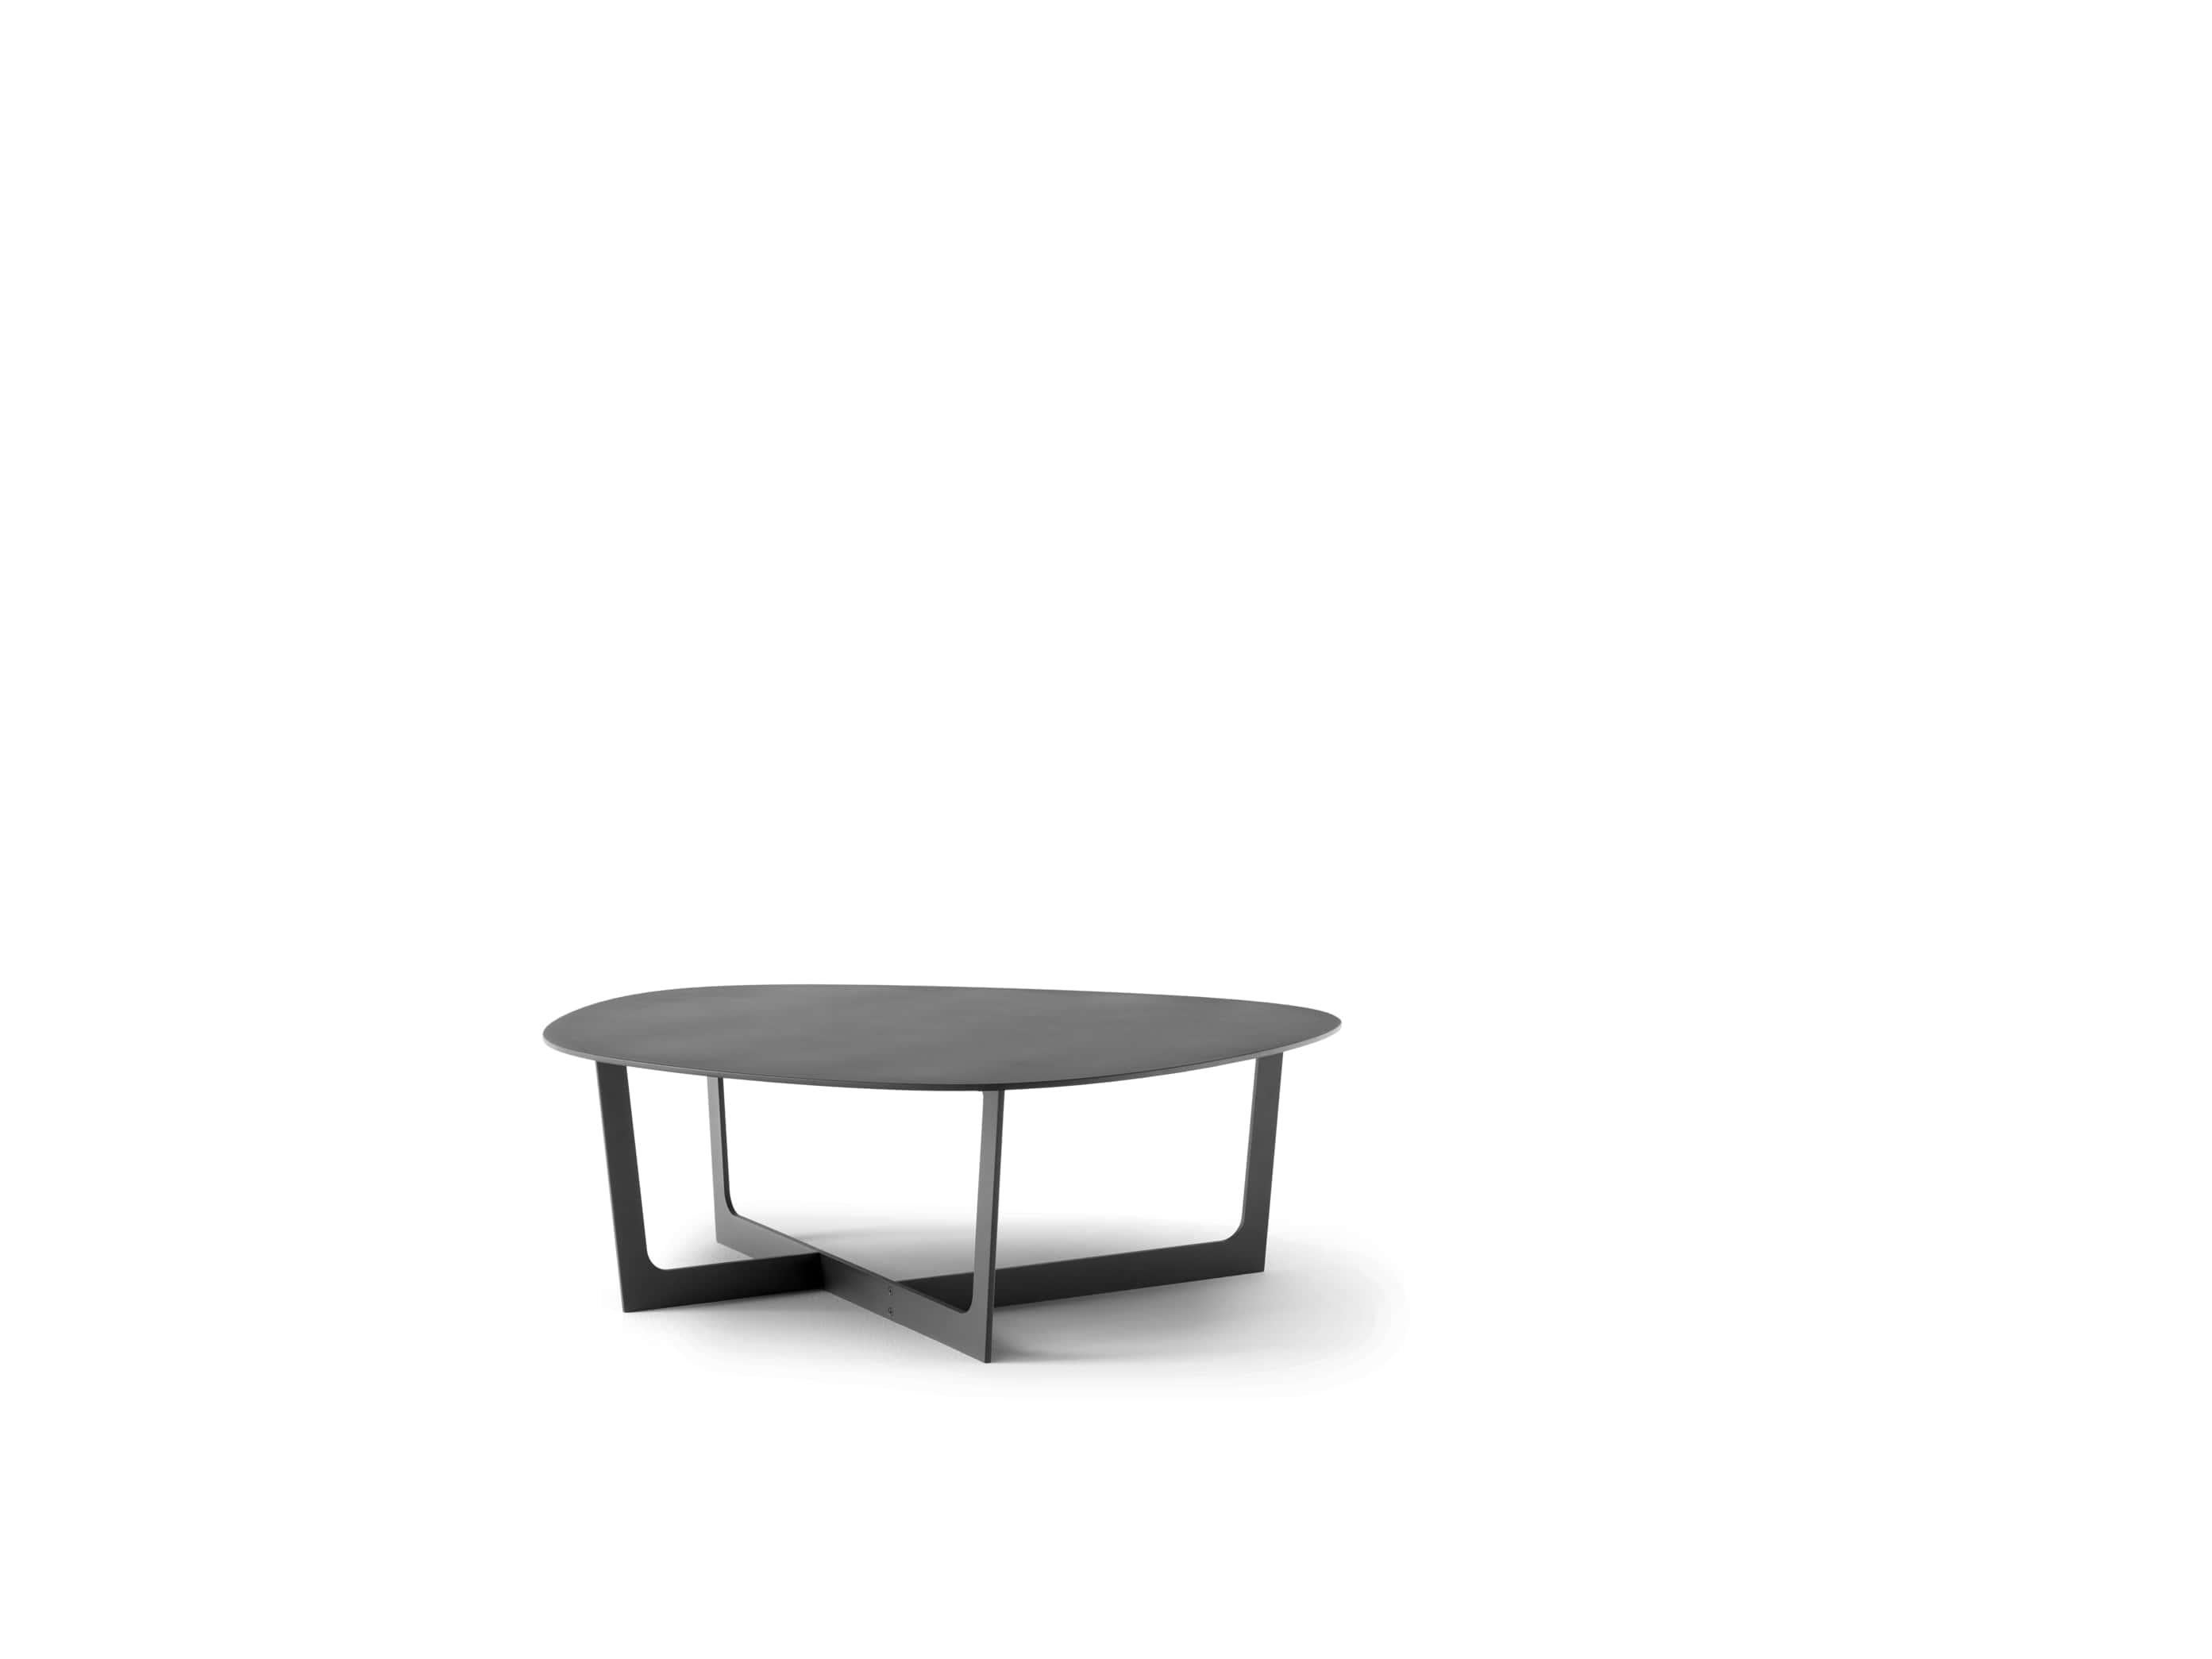 Polish Insula Coffee Table M5191 - Aluminum, textured black lacquered for Fredericia For Sale